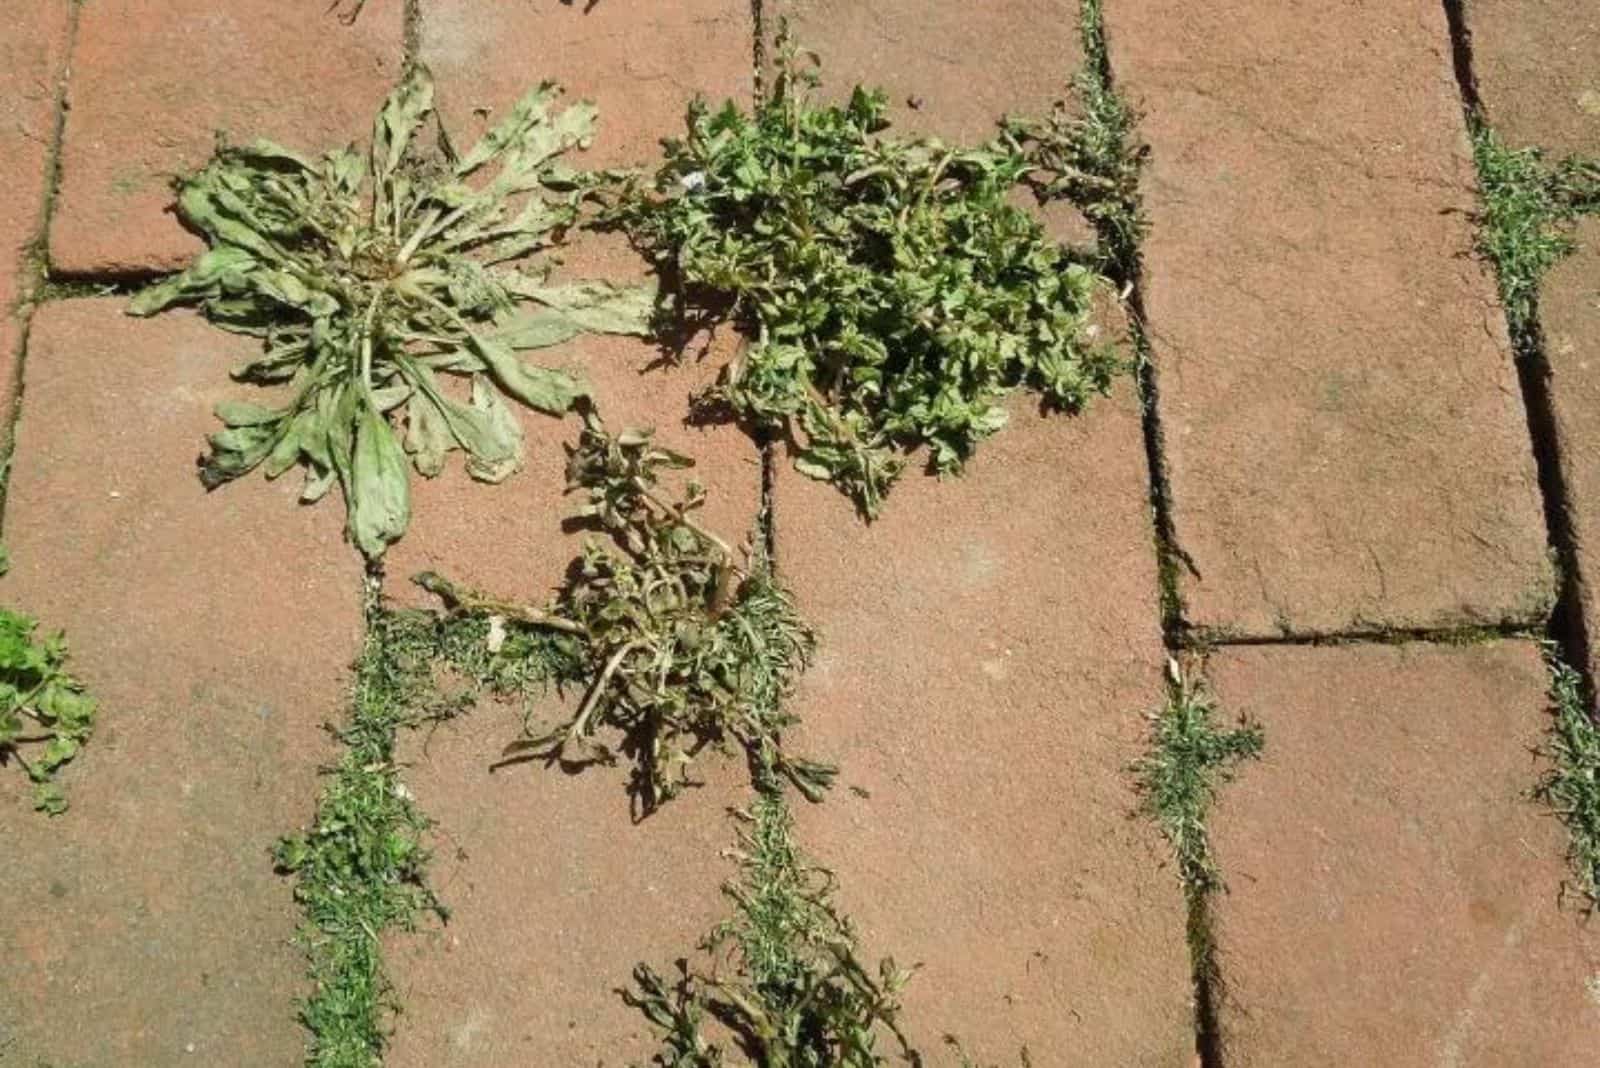 weeds are drying on the pavement